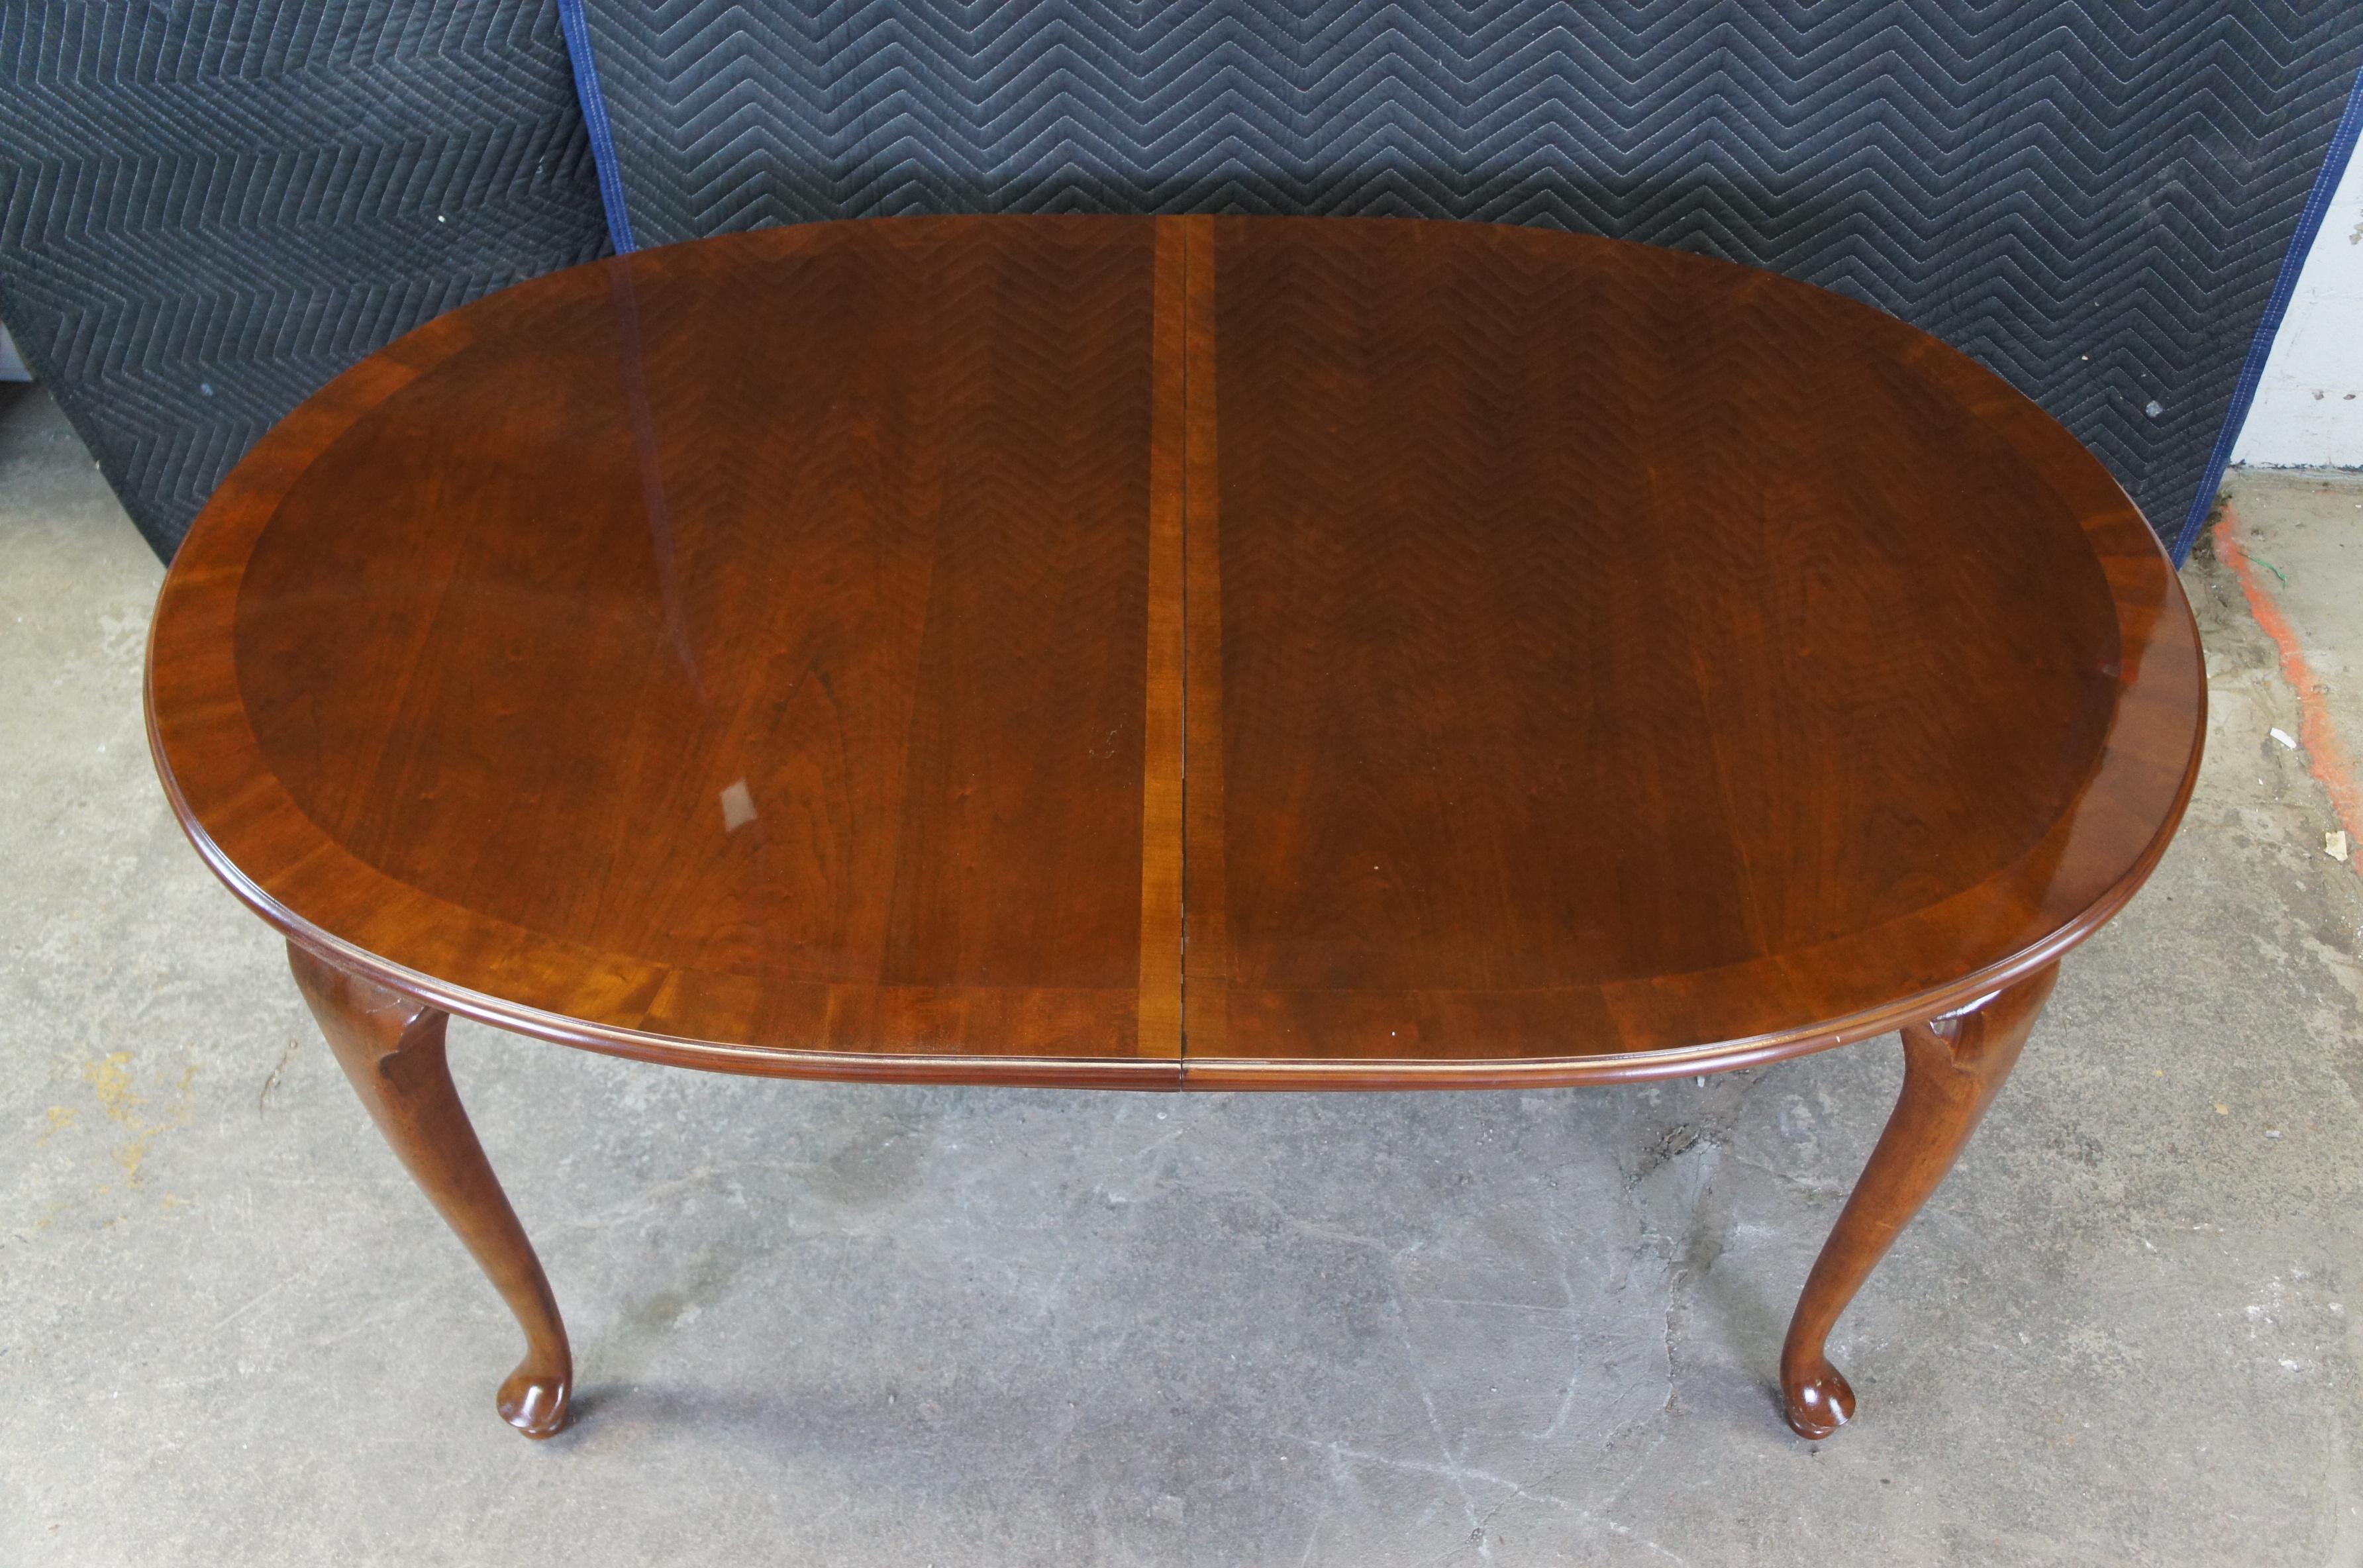 Vintage Cresent Queen Anne Style Oval Extendable Cherry Breakfast Dining Table In Good Condition For Sale In Dayton, OH